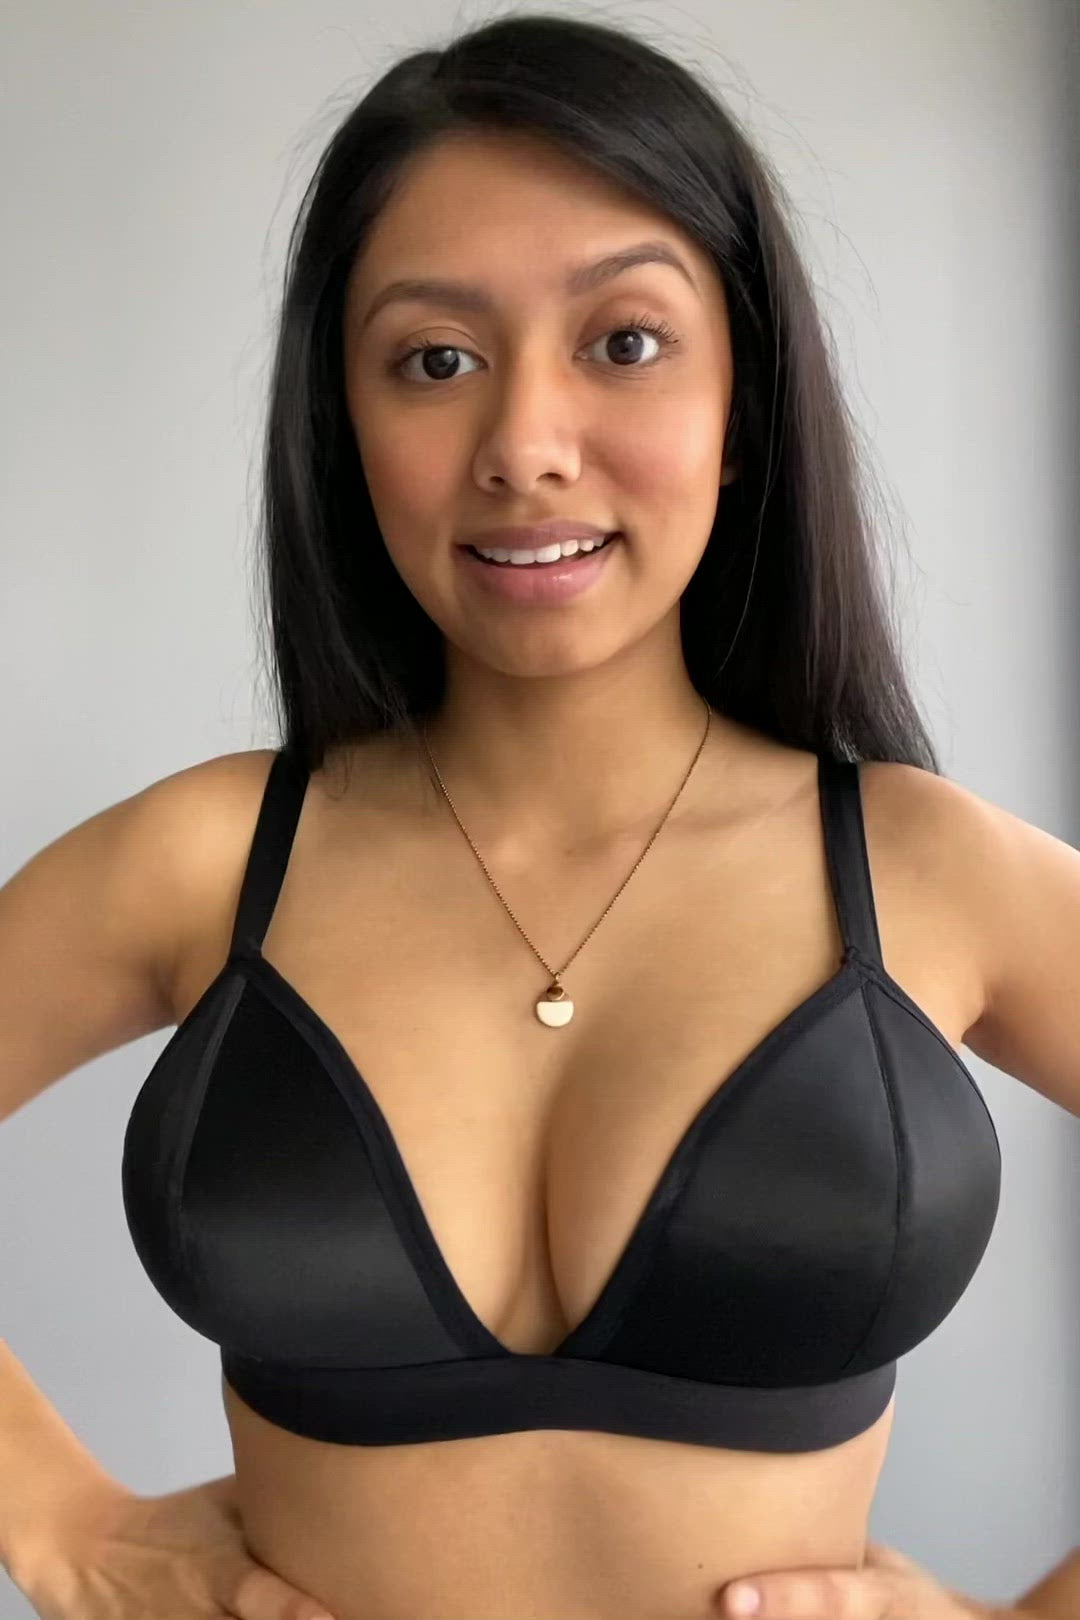 Video of Rubies Bras client and model wearing a black petite solid bra.